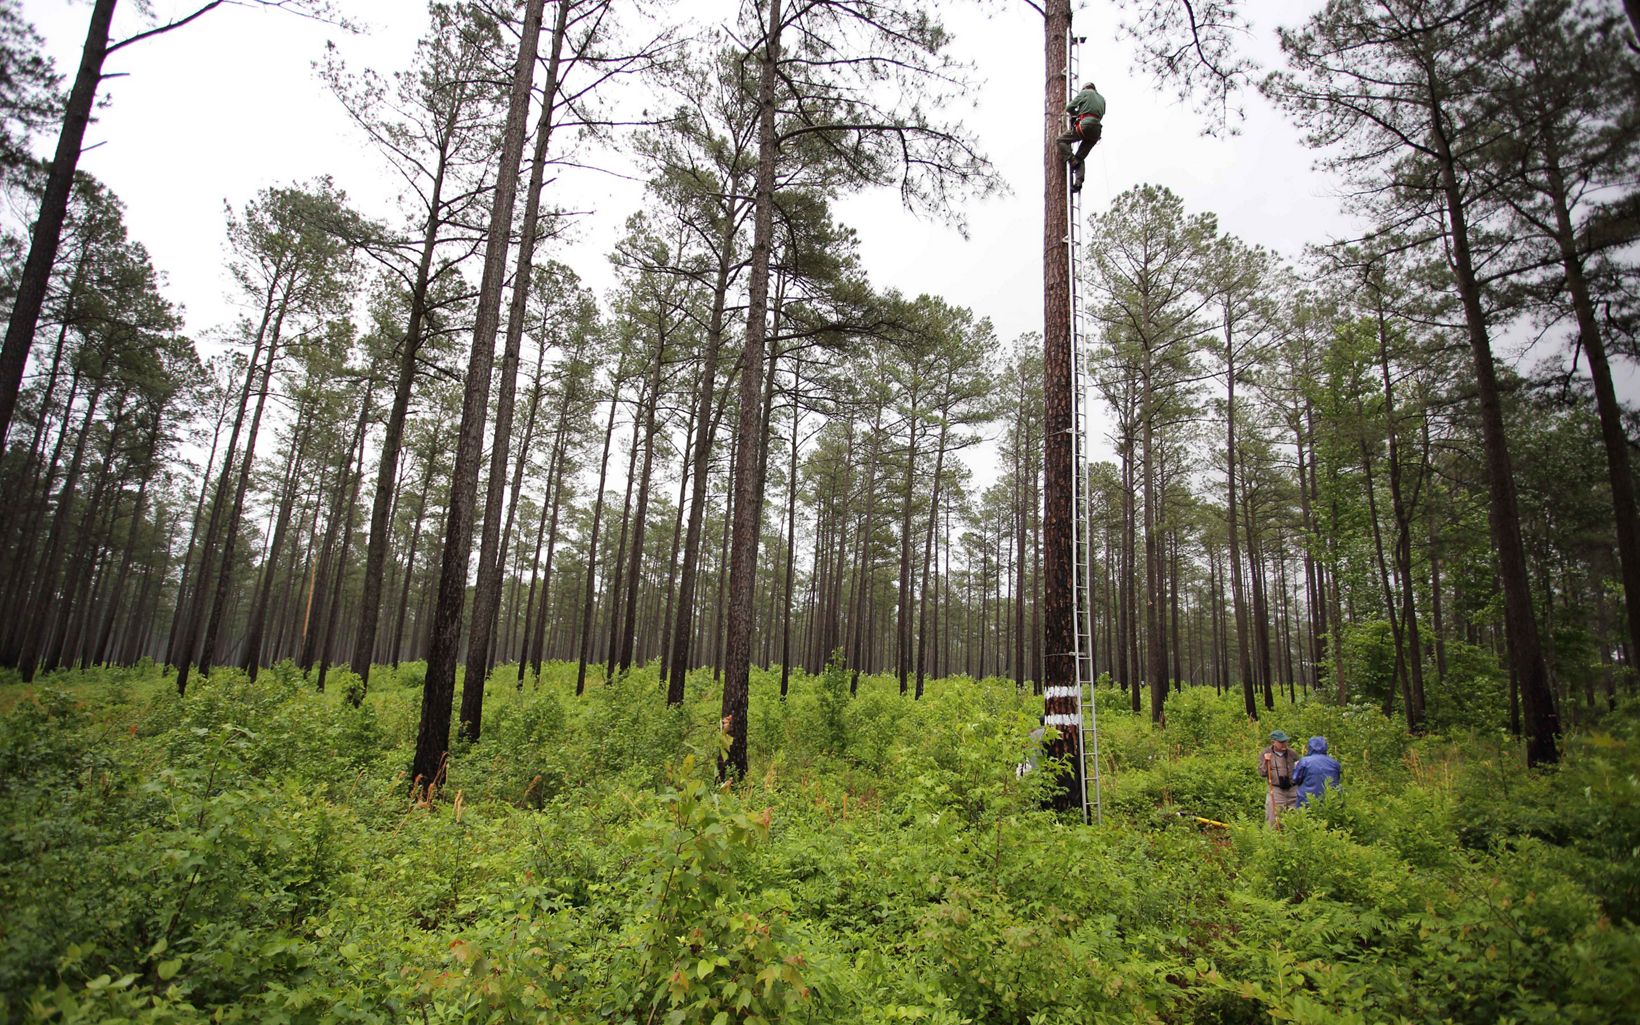 Piney Grove Dr. Bryan Watts, of the Center for Conservation Biology, climbs to the 40-foot high nest cavity to return a new banded red-cockaded woodpecker chick. © Robert B. Clontz / TNC